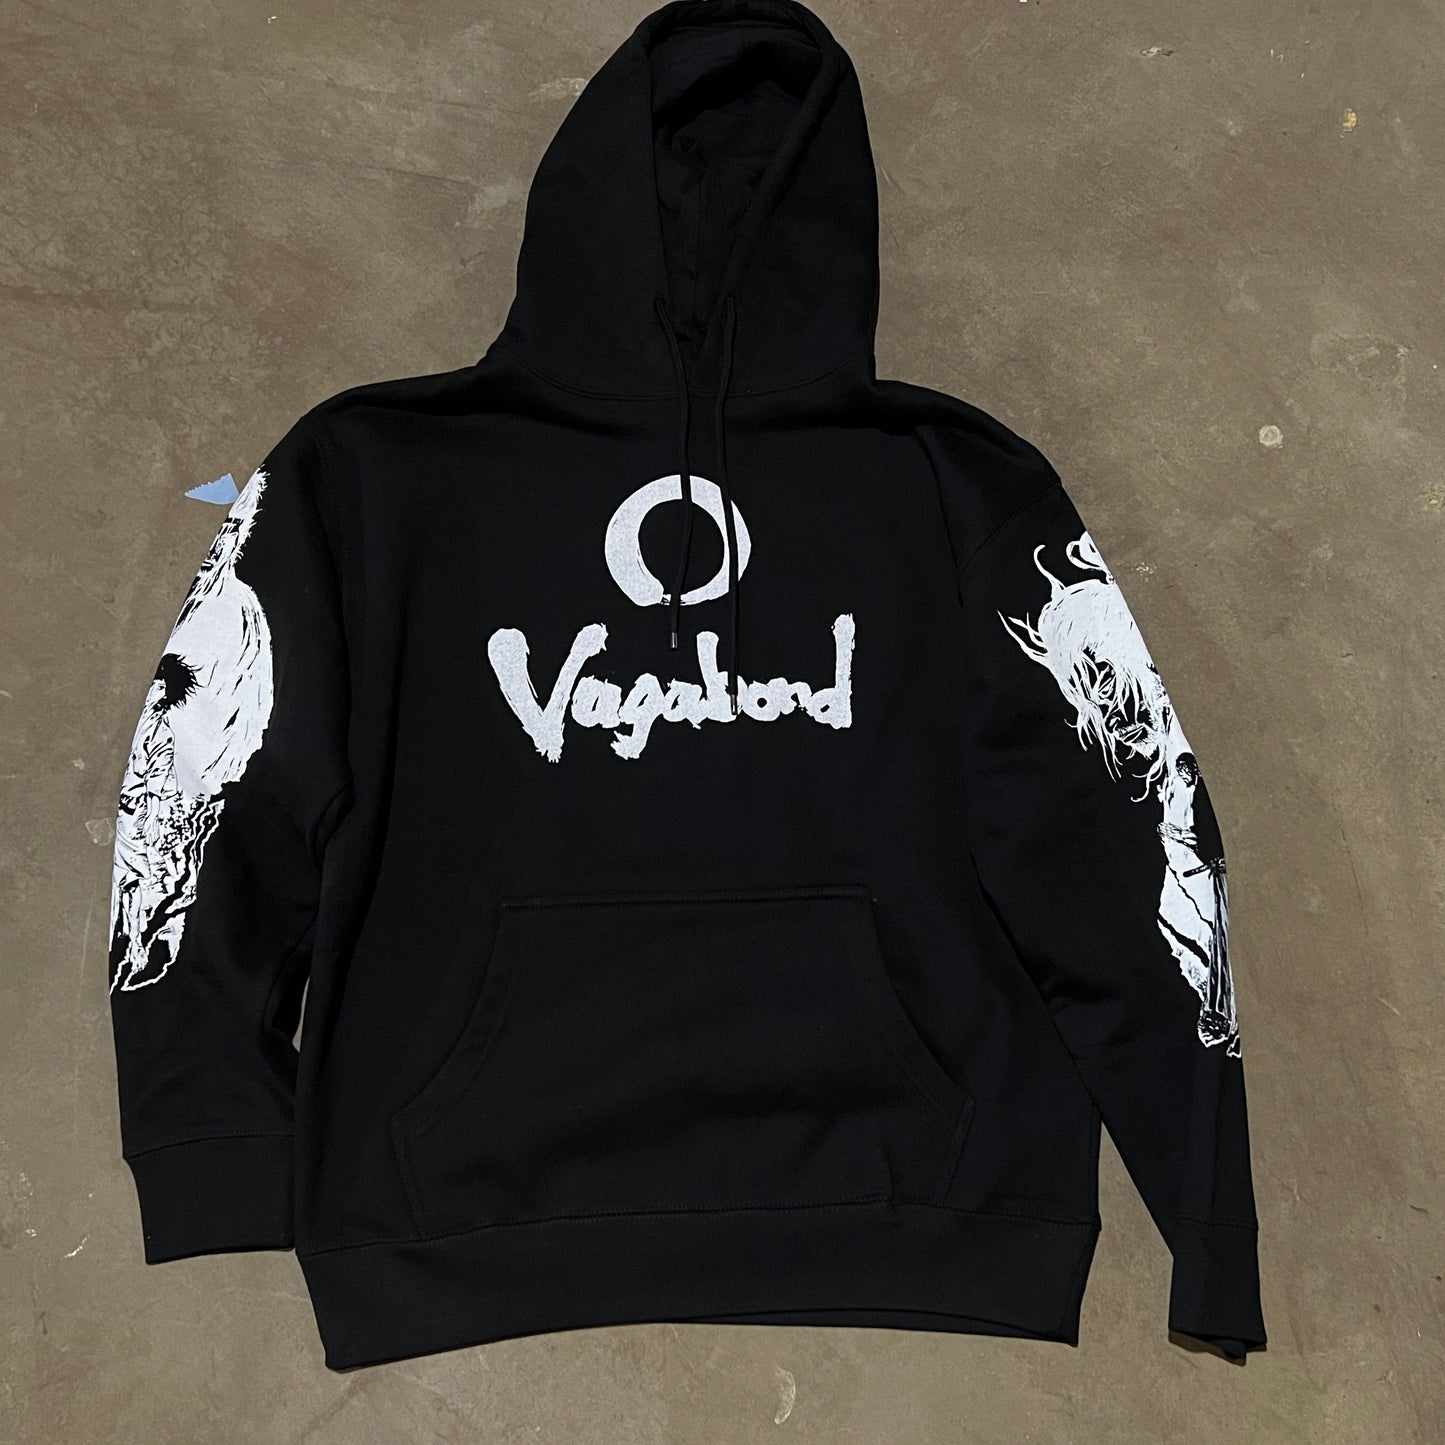 IMPERFECT VGBND 12A HOODIE